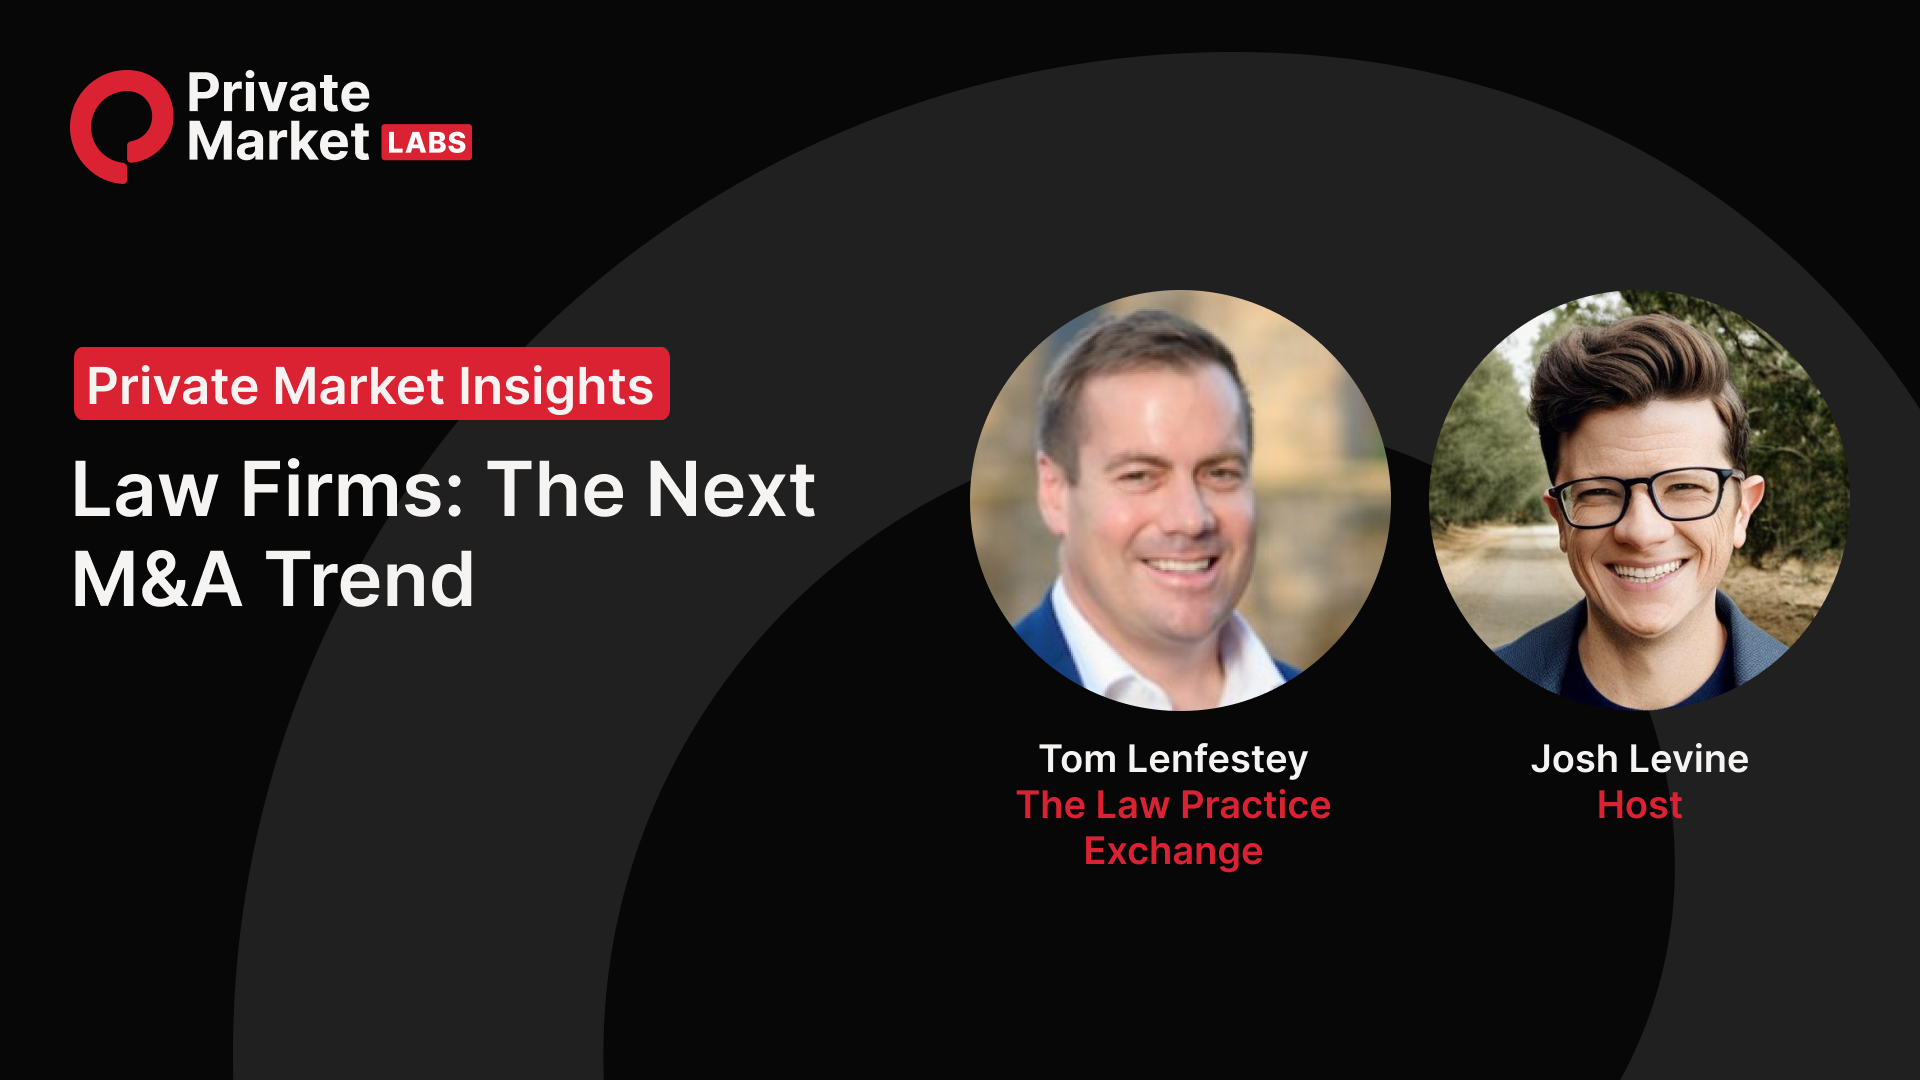 Buying Law Firms: The Next M&A Trend with Tom Lenfestey